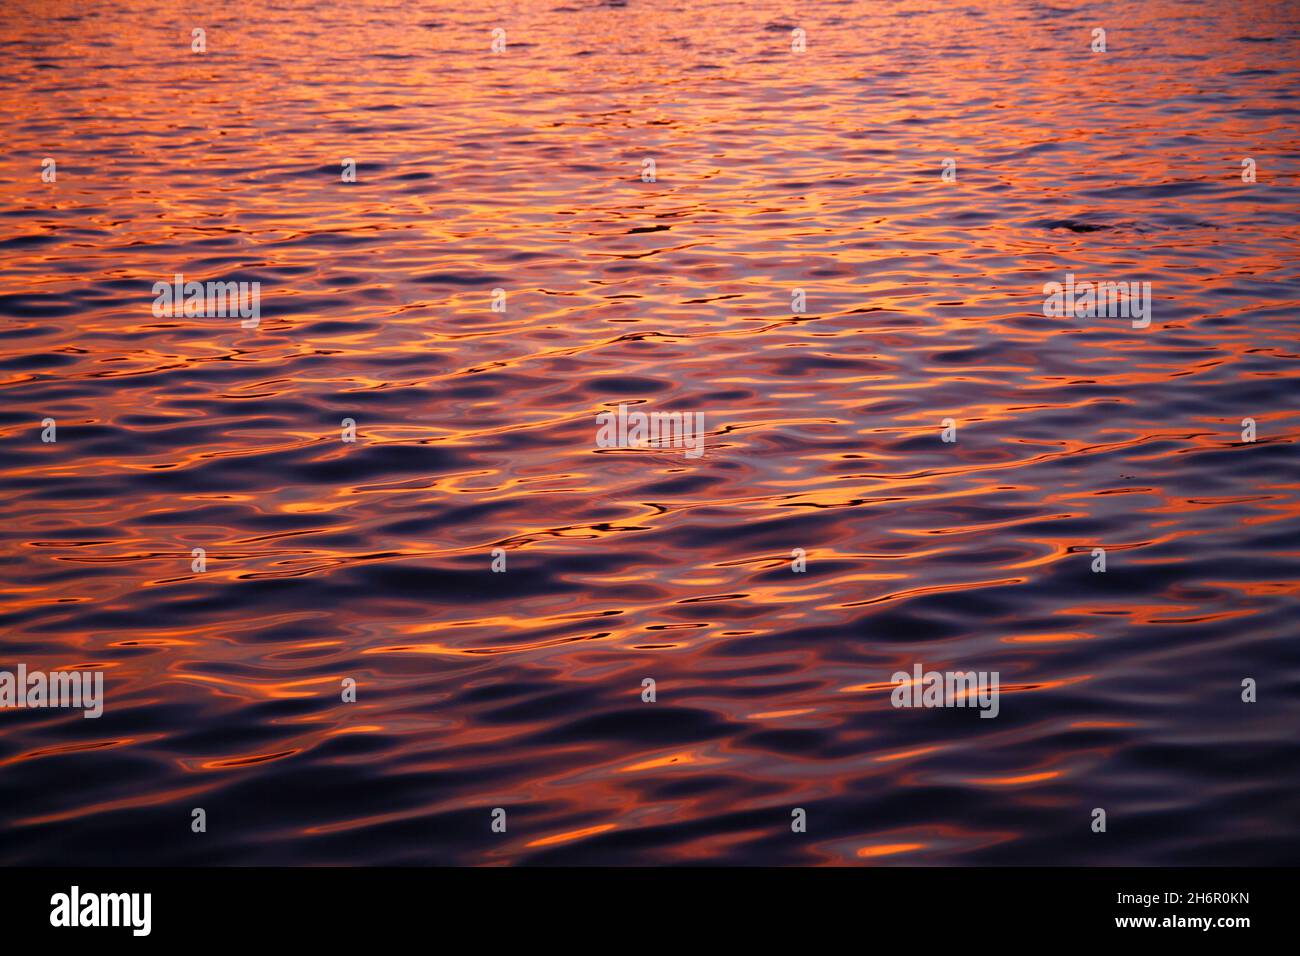 The beauty of the colors of the waves in the water during a summer sunset with a close up shot Stock Photo